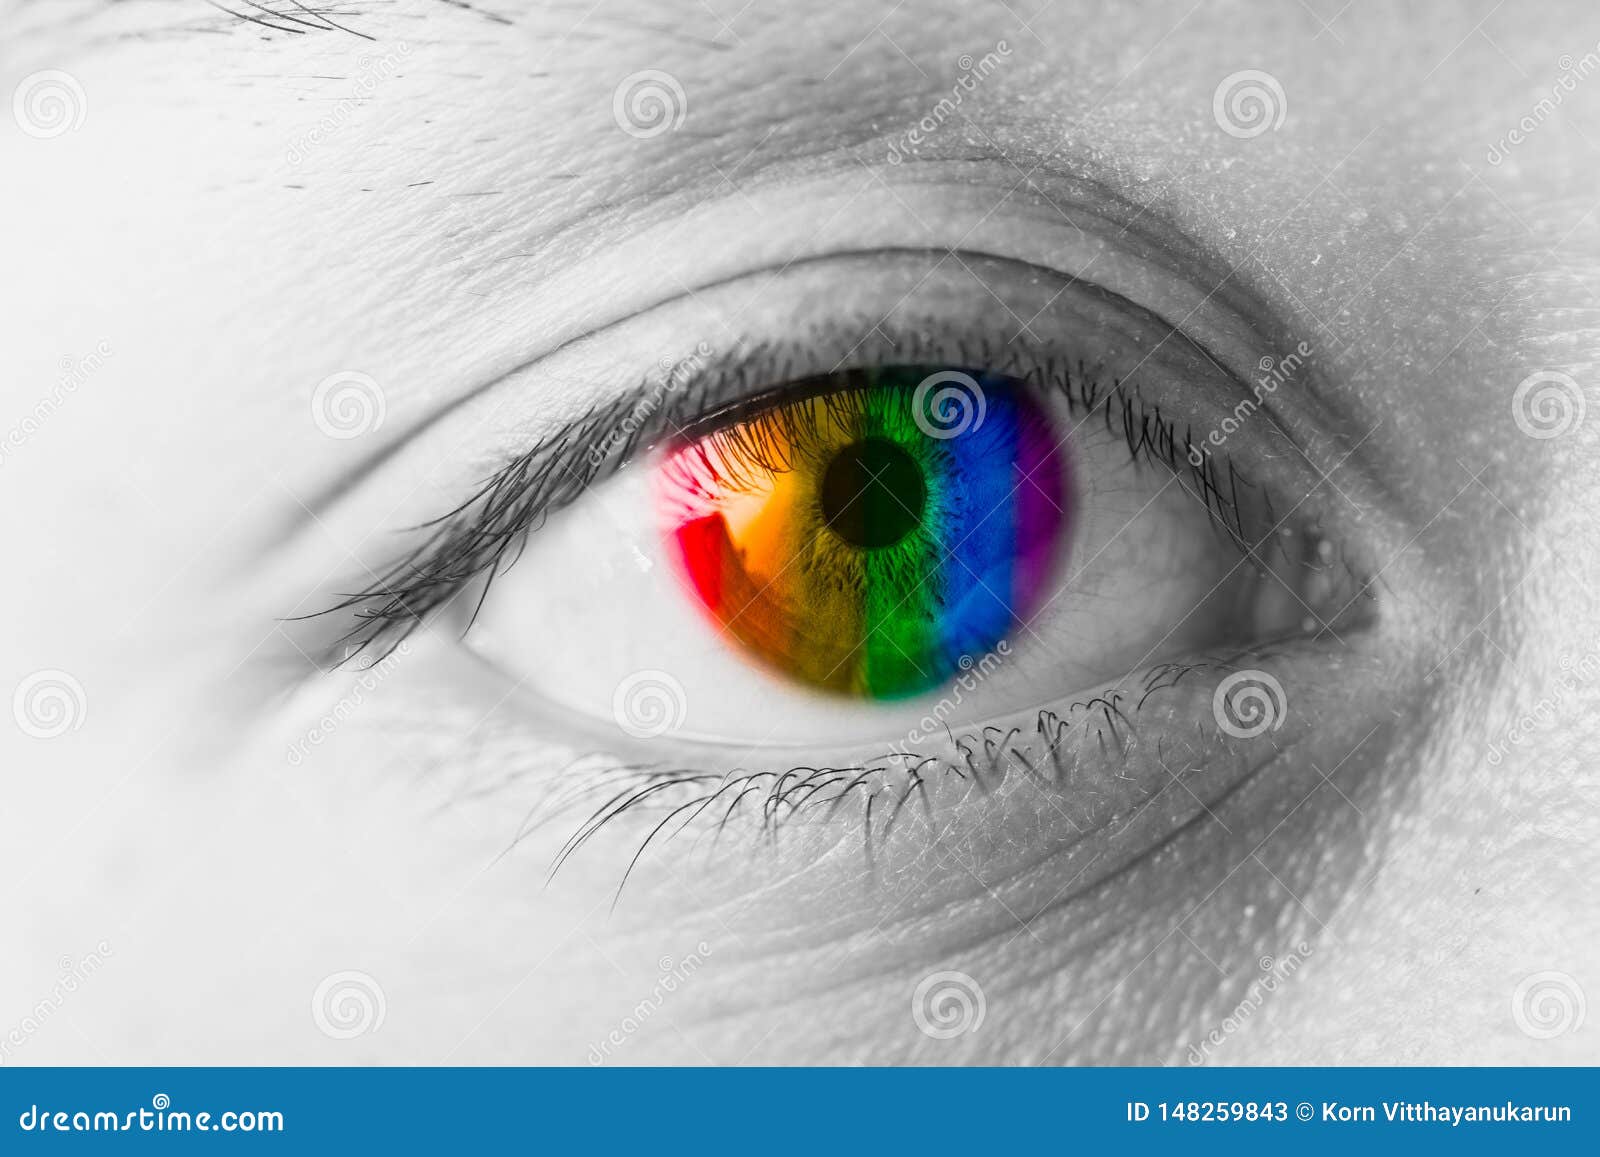 Colors Eyes Vision Concept Lgbt Rainbow Stock Image Image Of